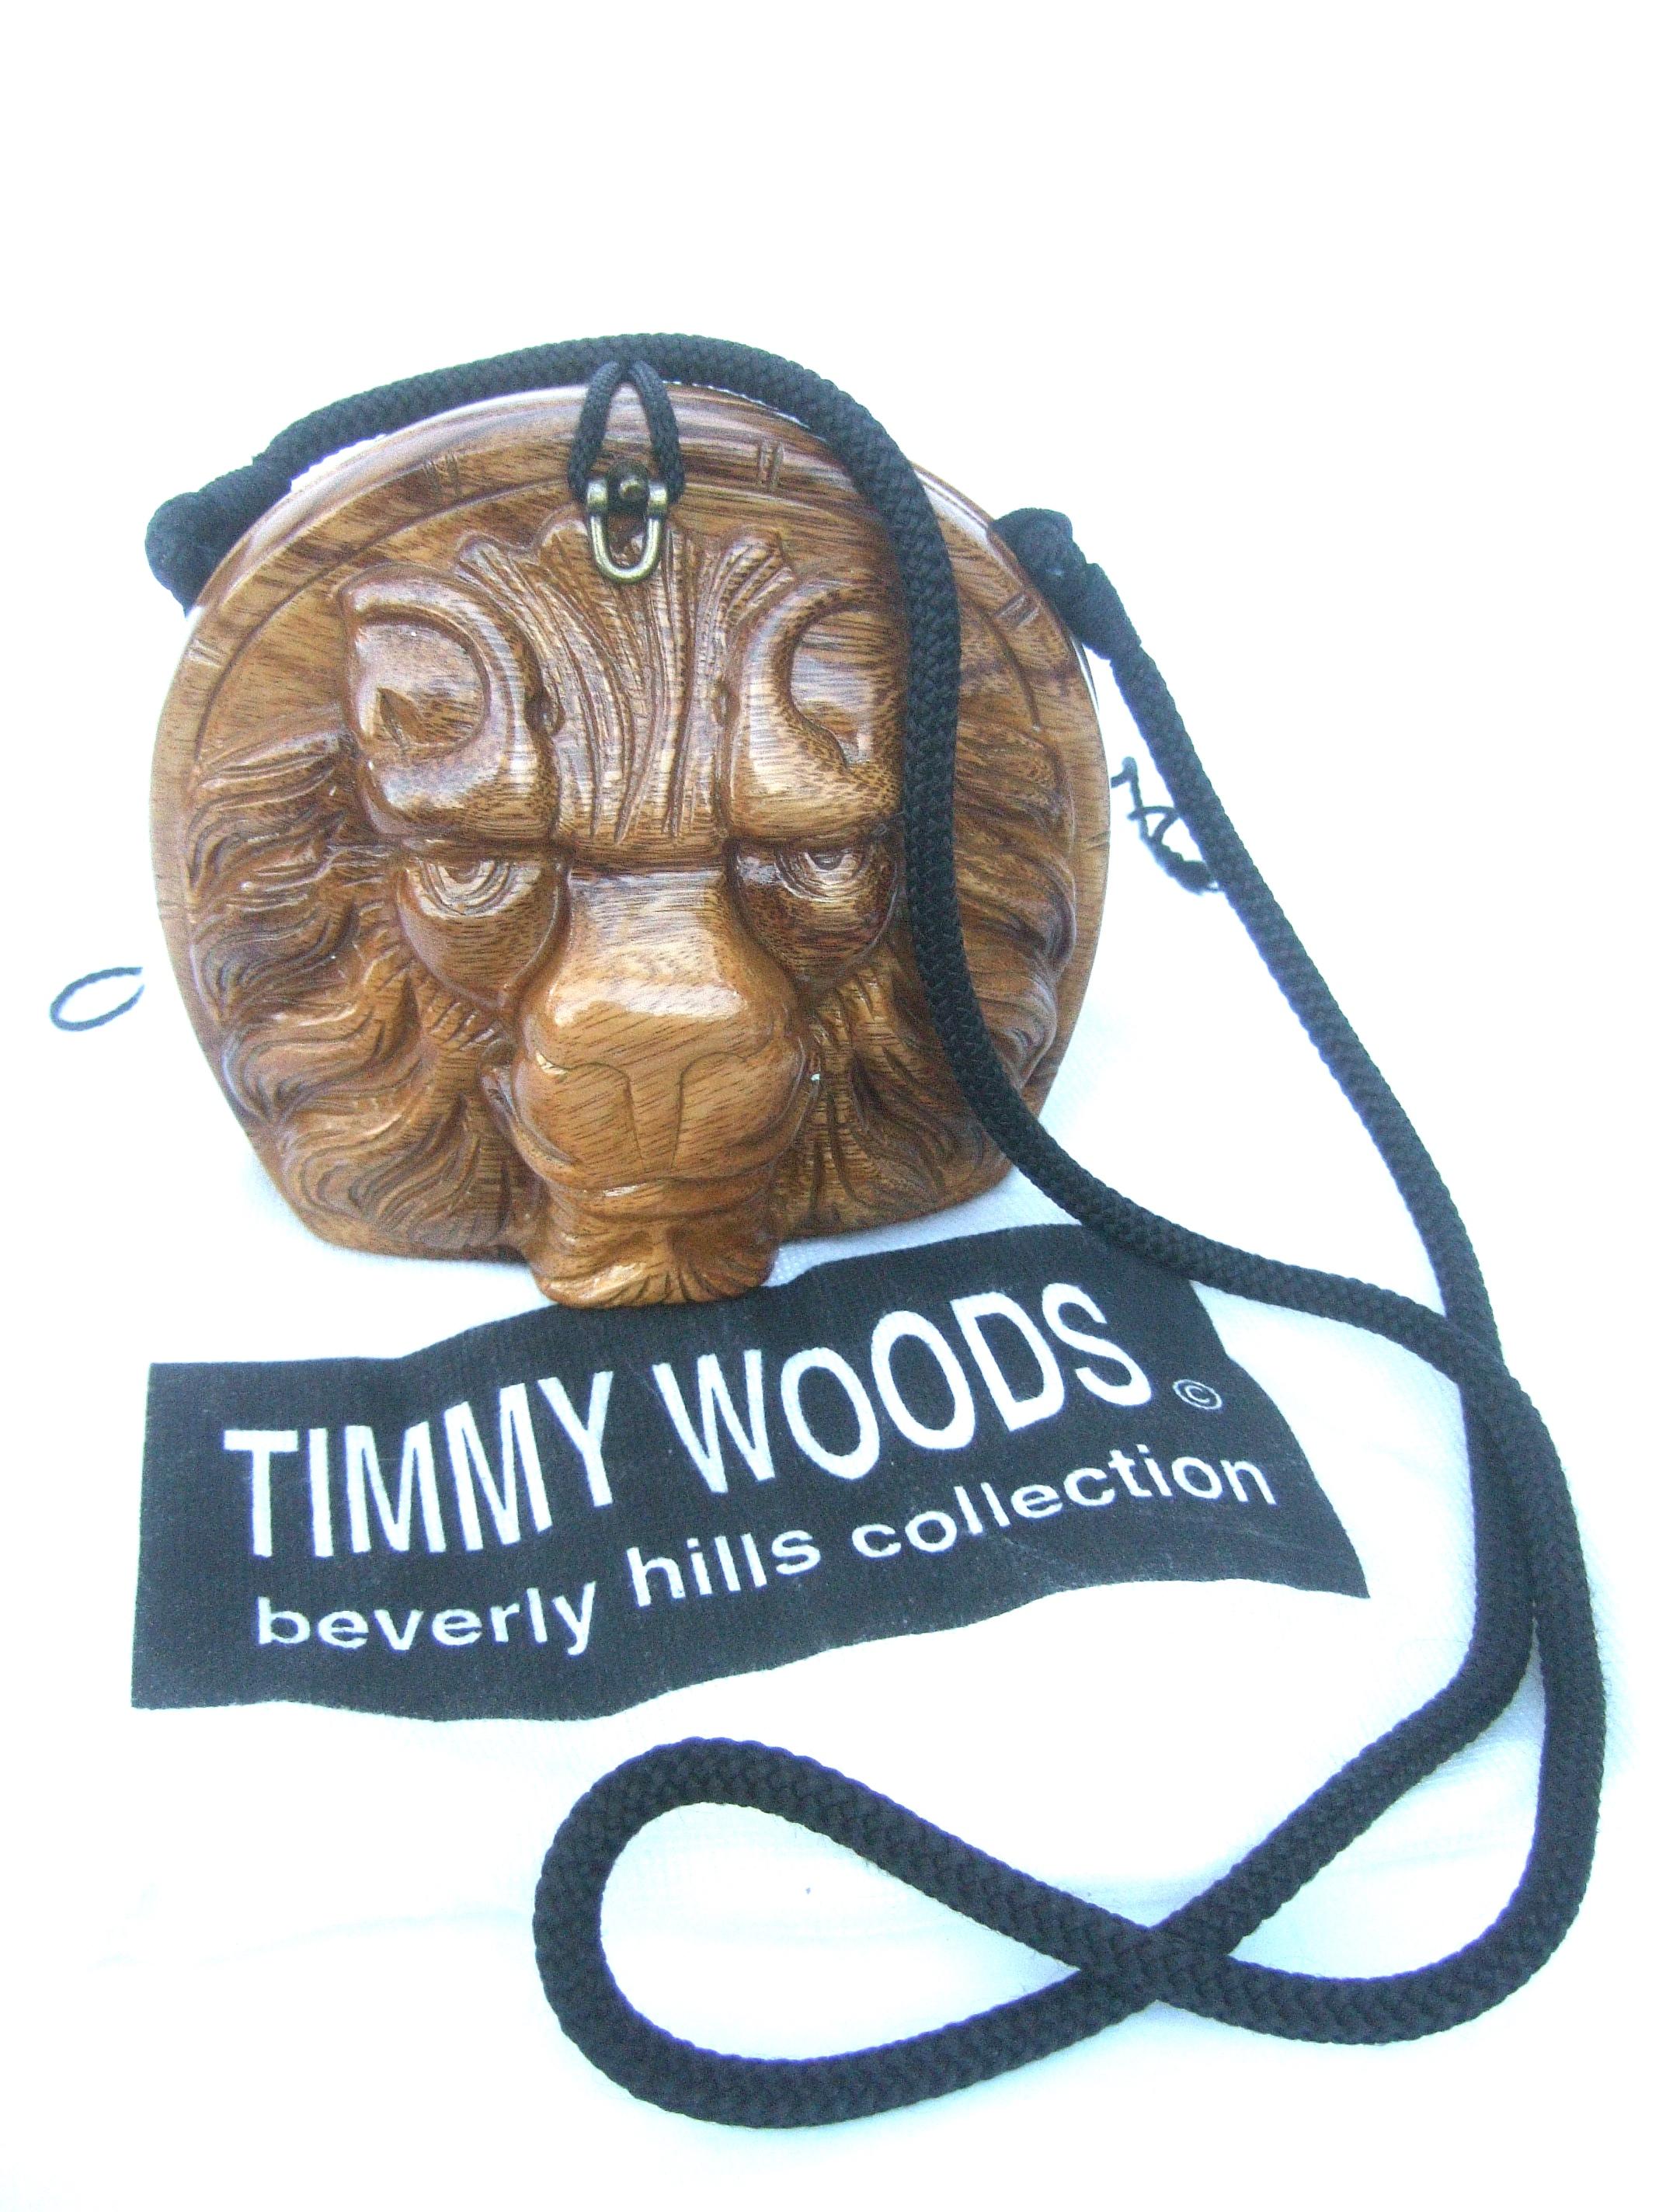 Timmy Wood's Beverly Hills carved wood artisan lion head shoulder bag 
The hand-carved wood lion head shoulder bag is constructed from fallen
trees in the Philippines

That can take up to 30 days to design & execute. The lion's head 
is designed